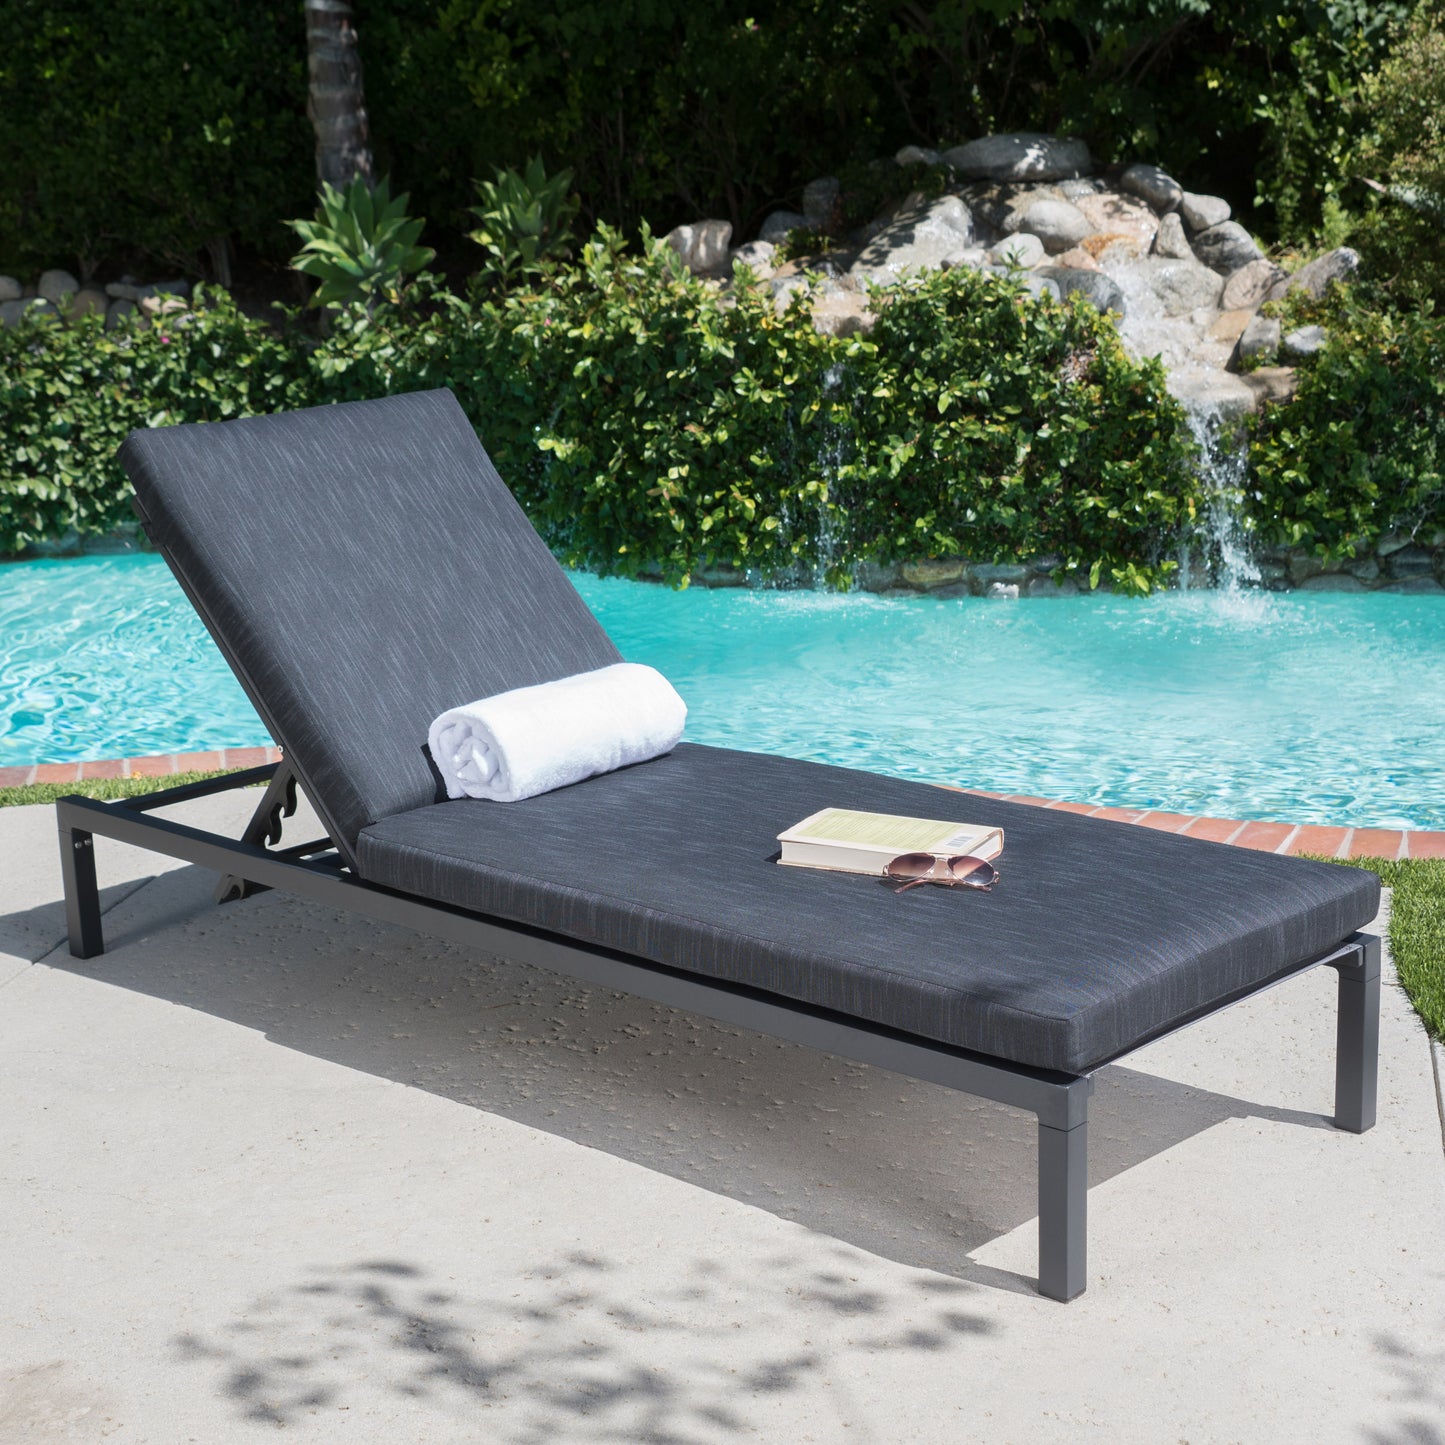 Nealie Outdoor Mesh Aluminum Frame Chaise Lounge w/ Water Resistant Cushion